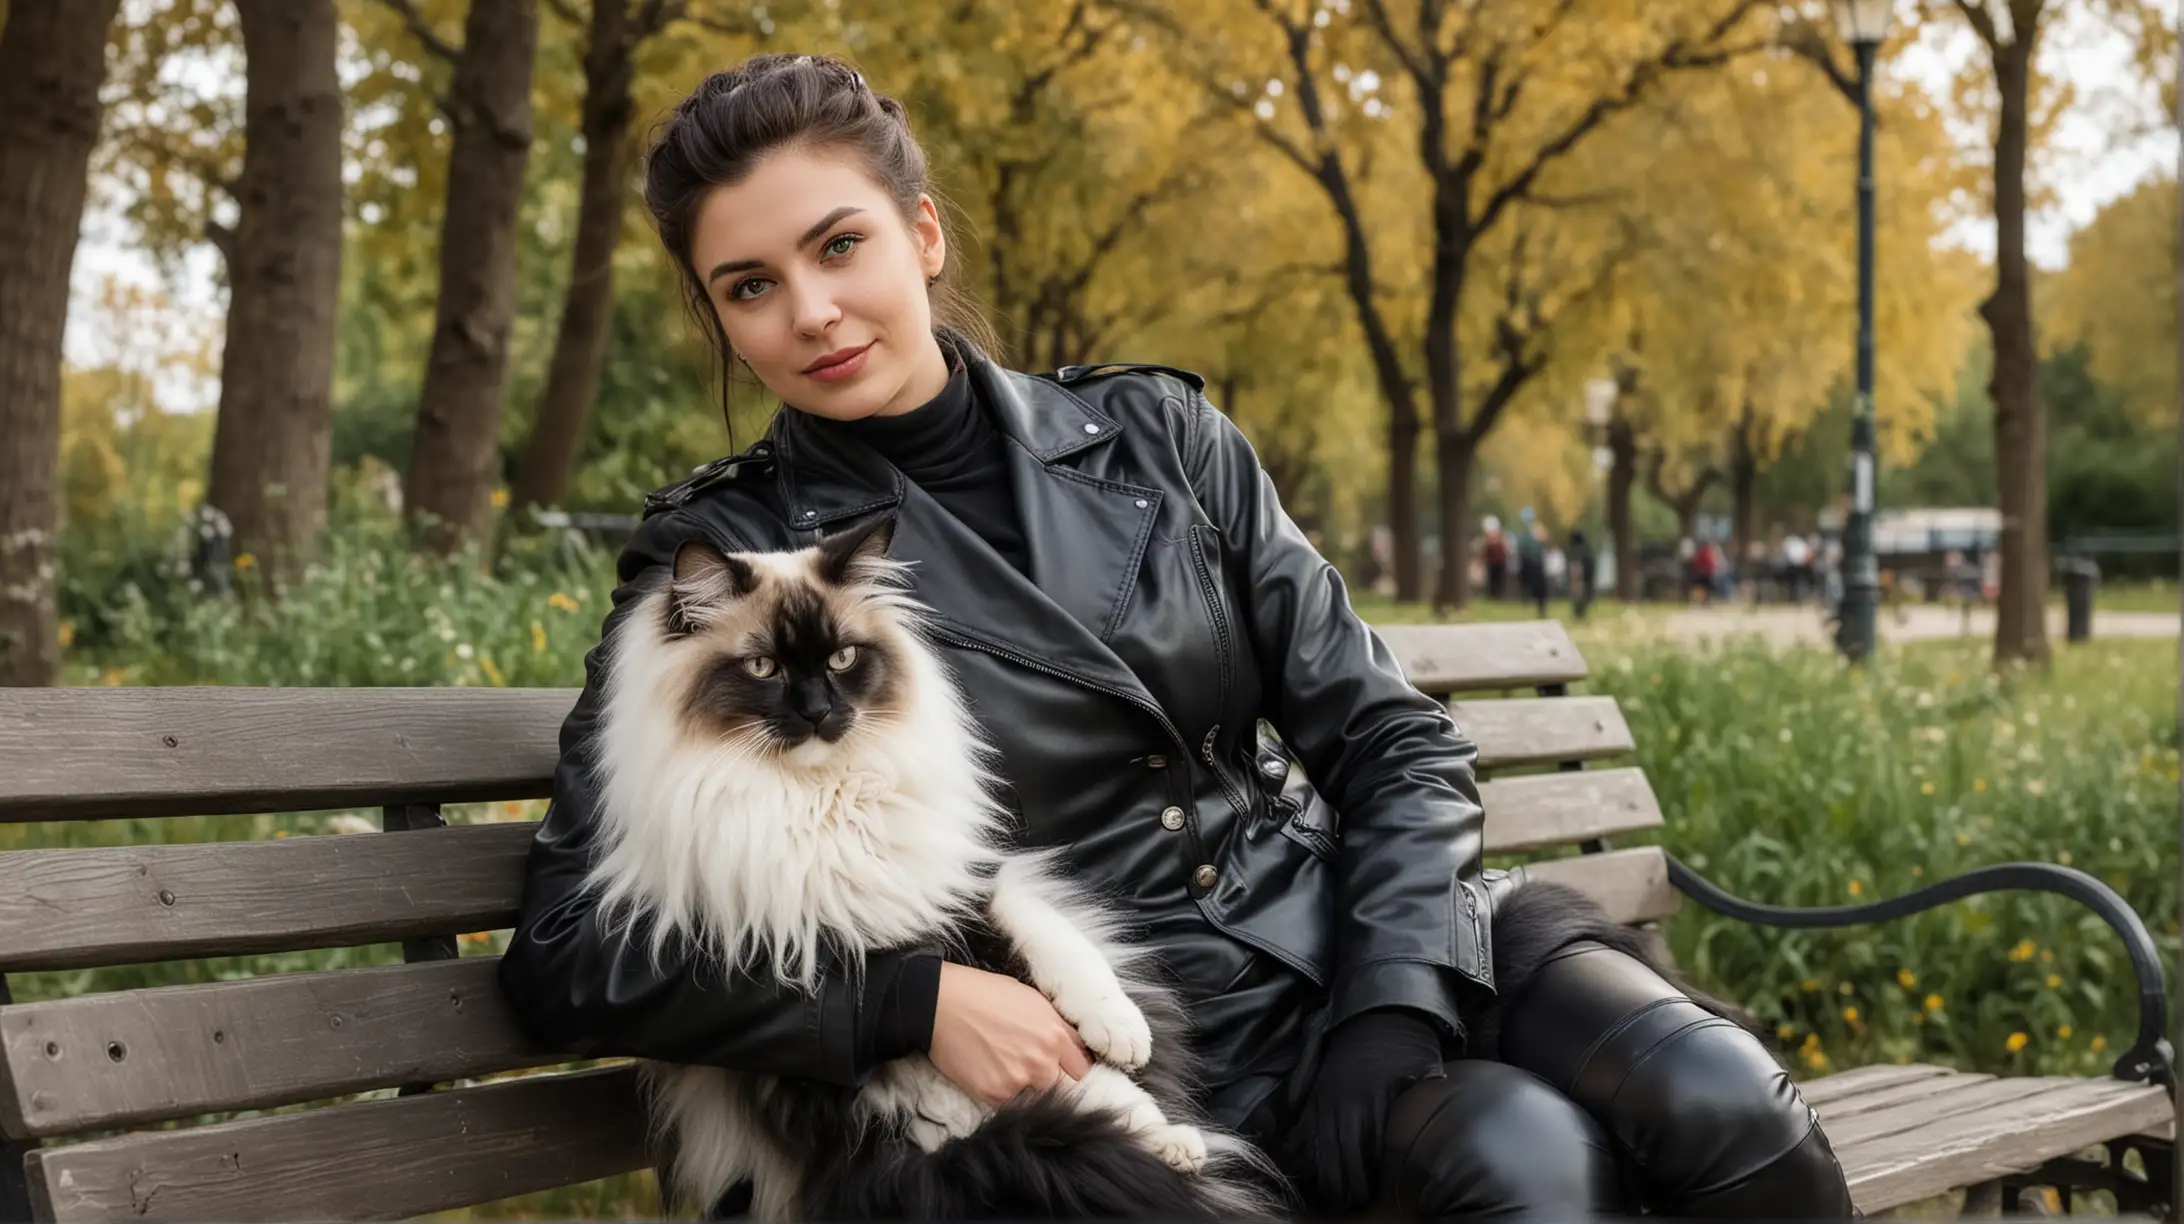 Modern Woman in Black Leather Uniform with Angora Cat in Park